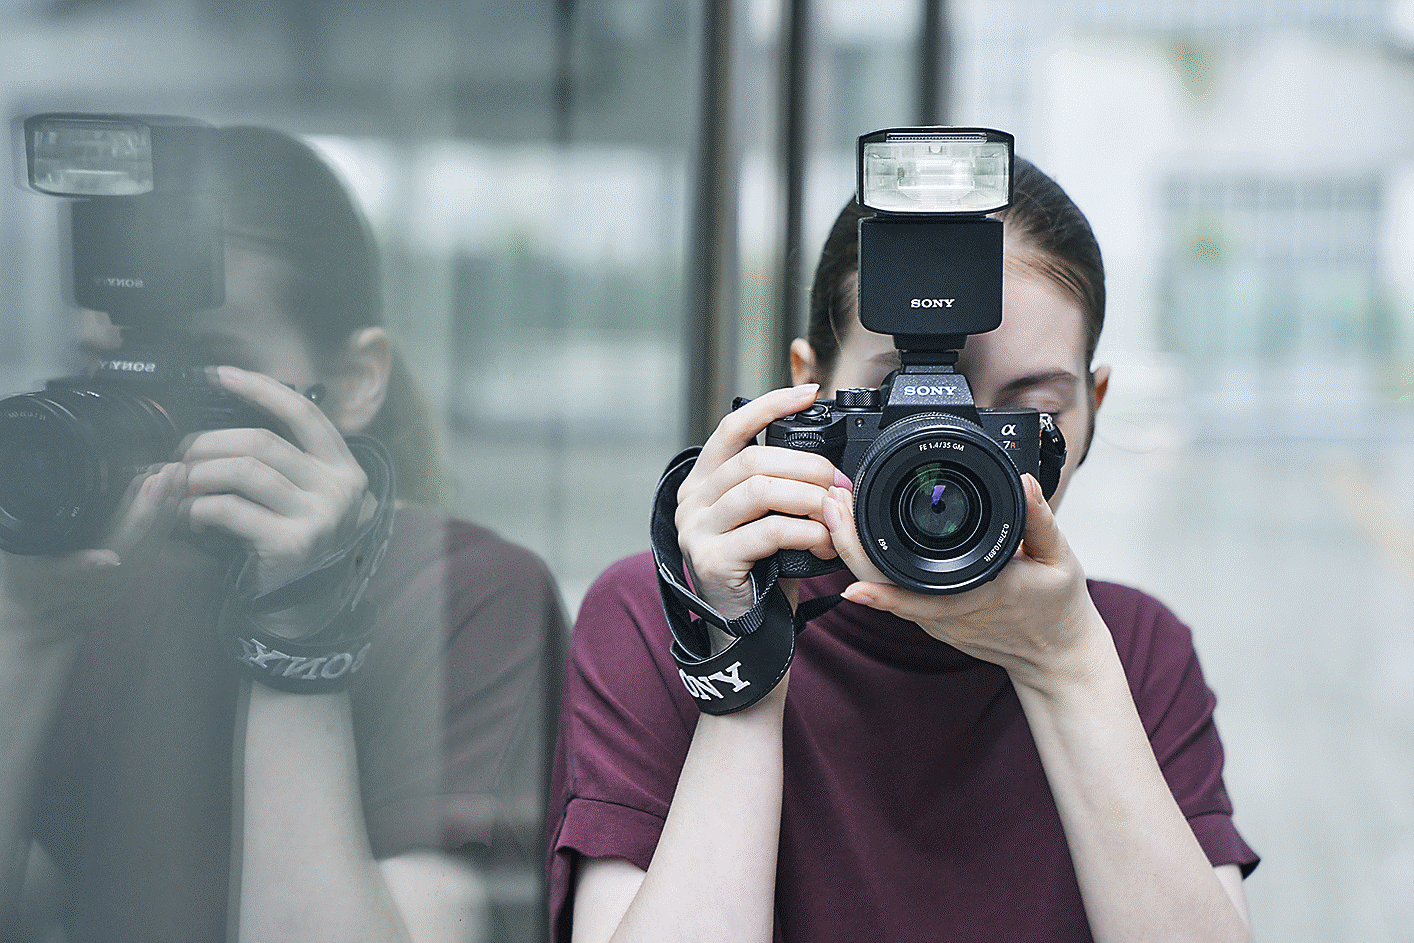 Image of a woman holding a camera in front of her